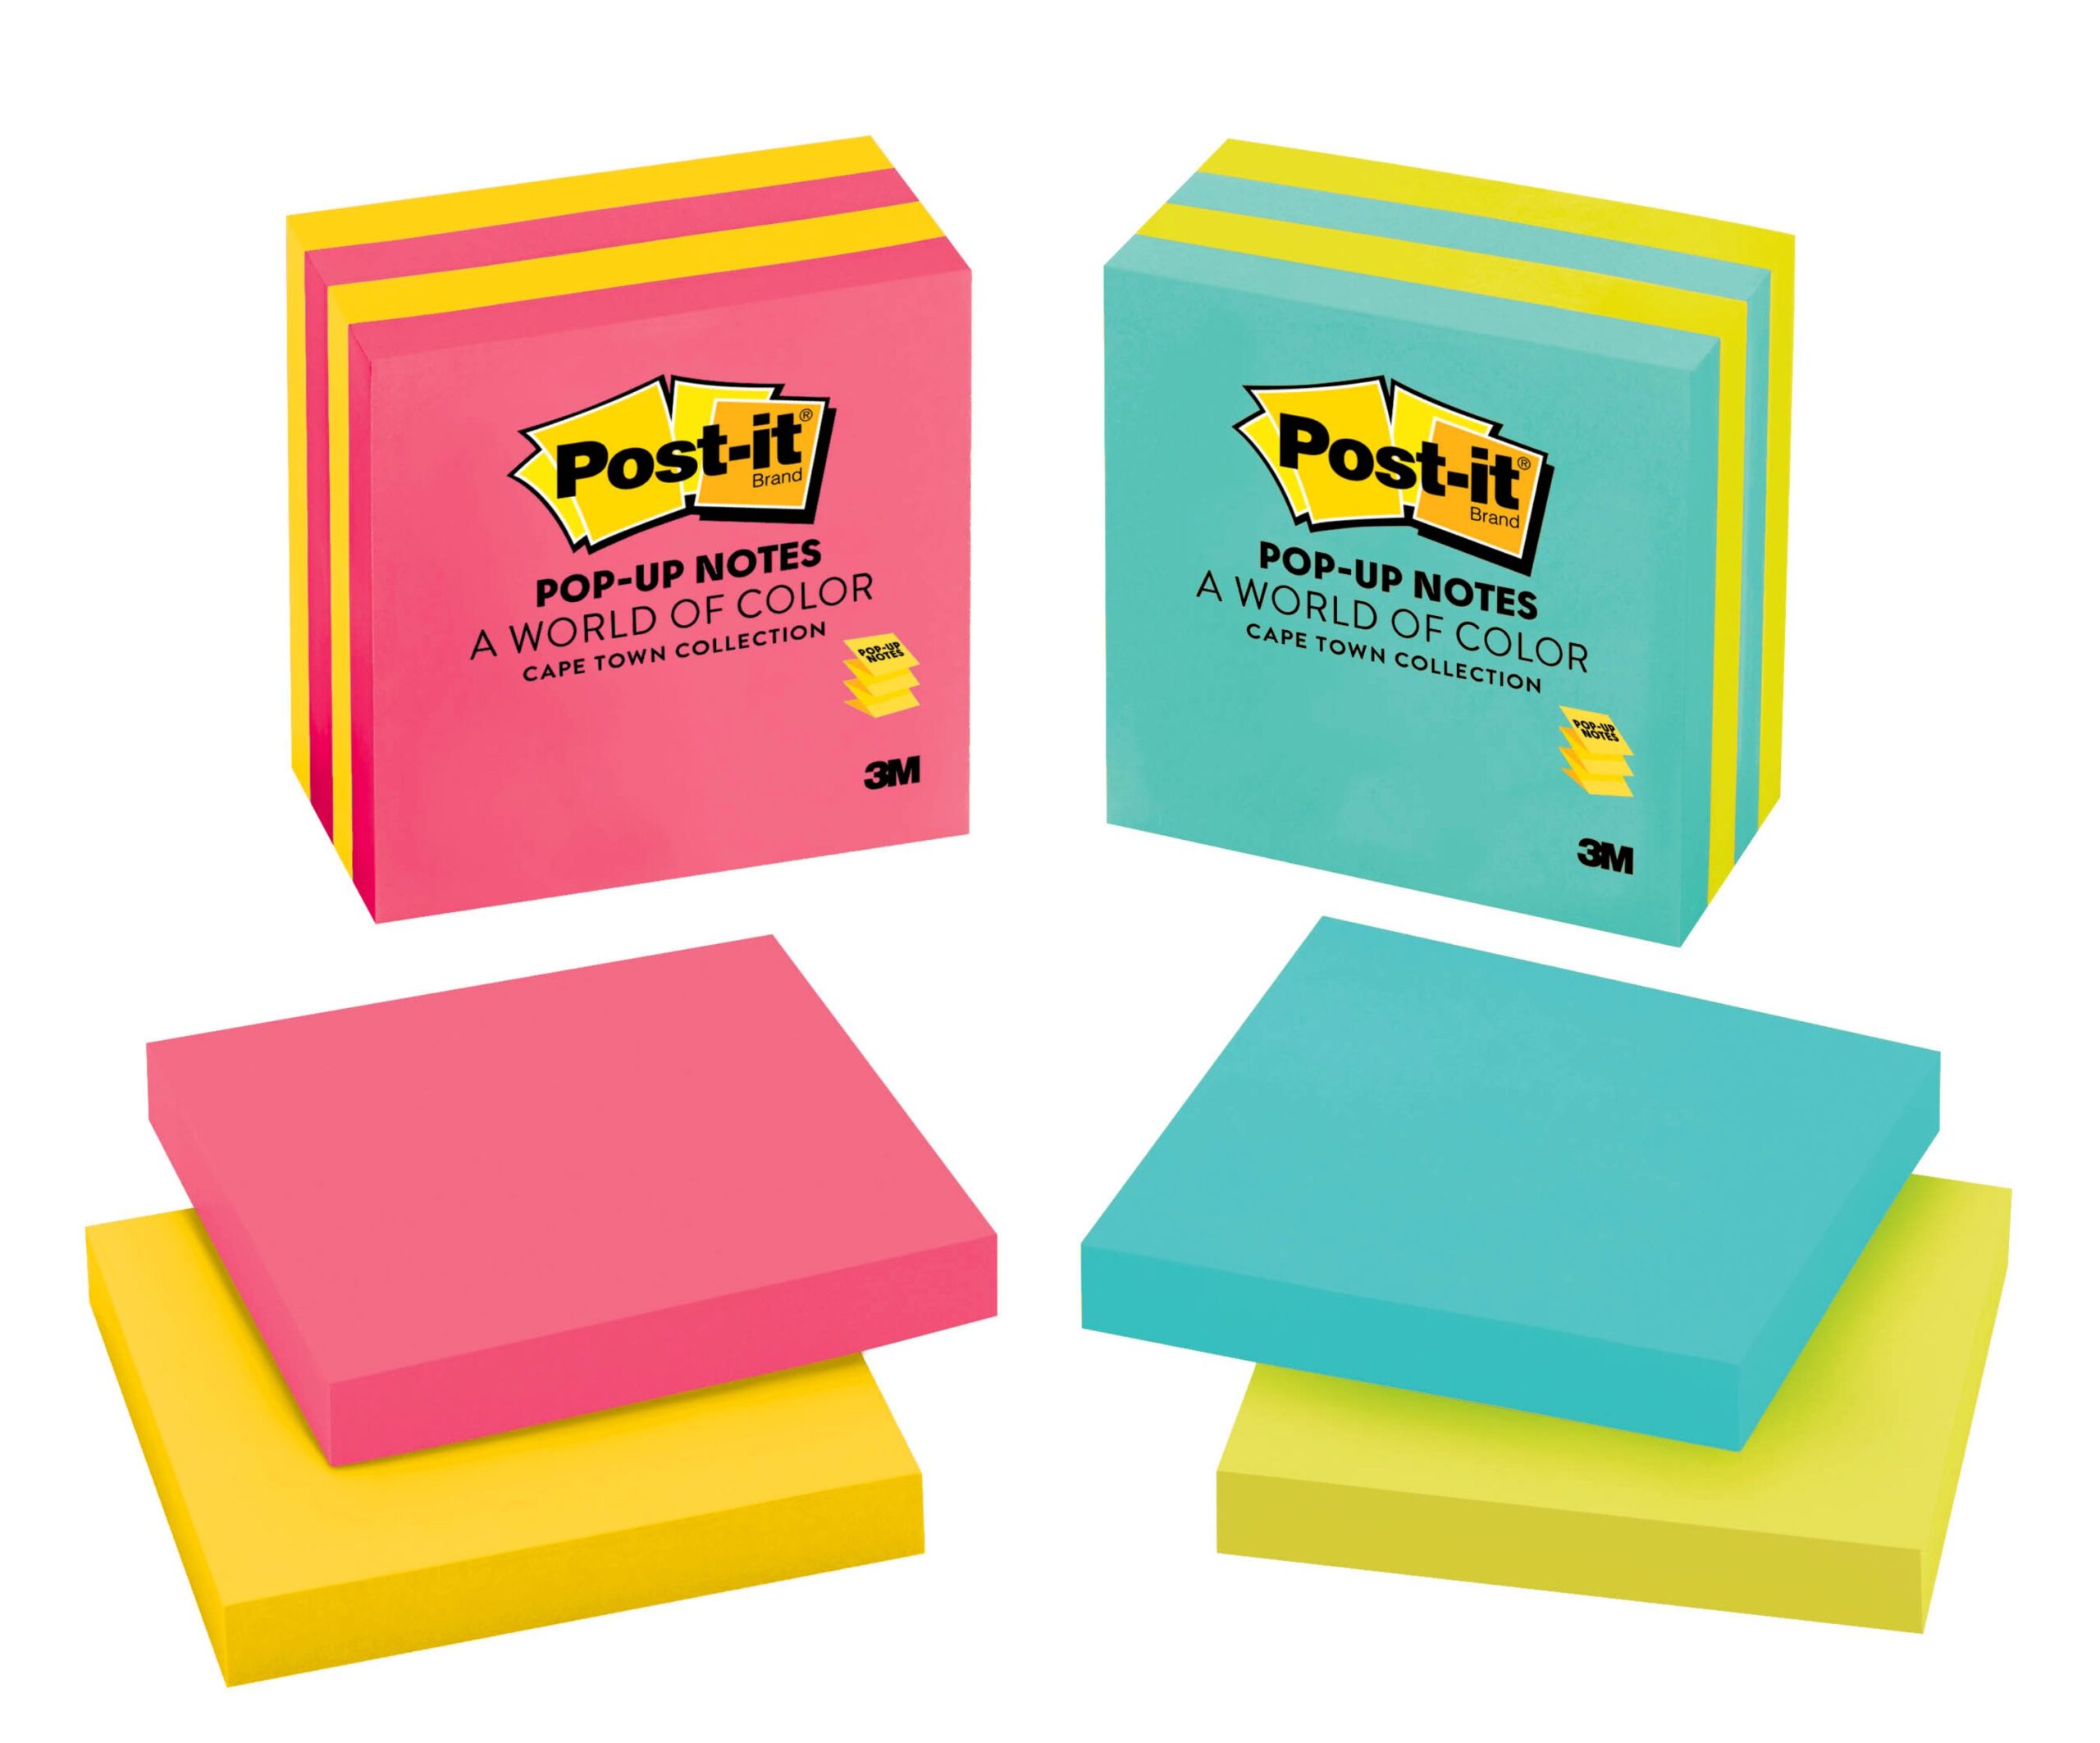 Post-it pop-up notes are on sale now! Get them while they last!